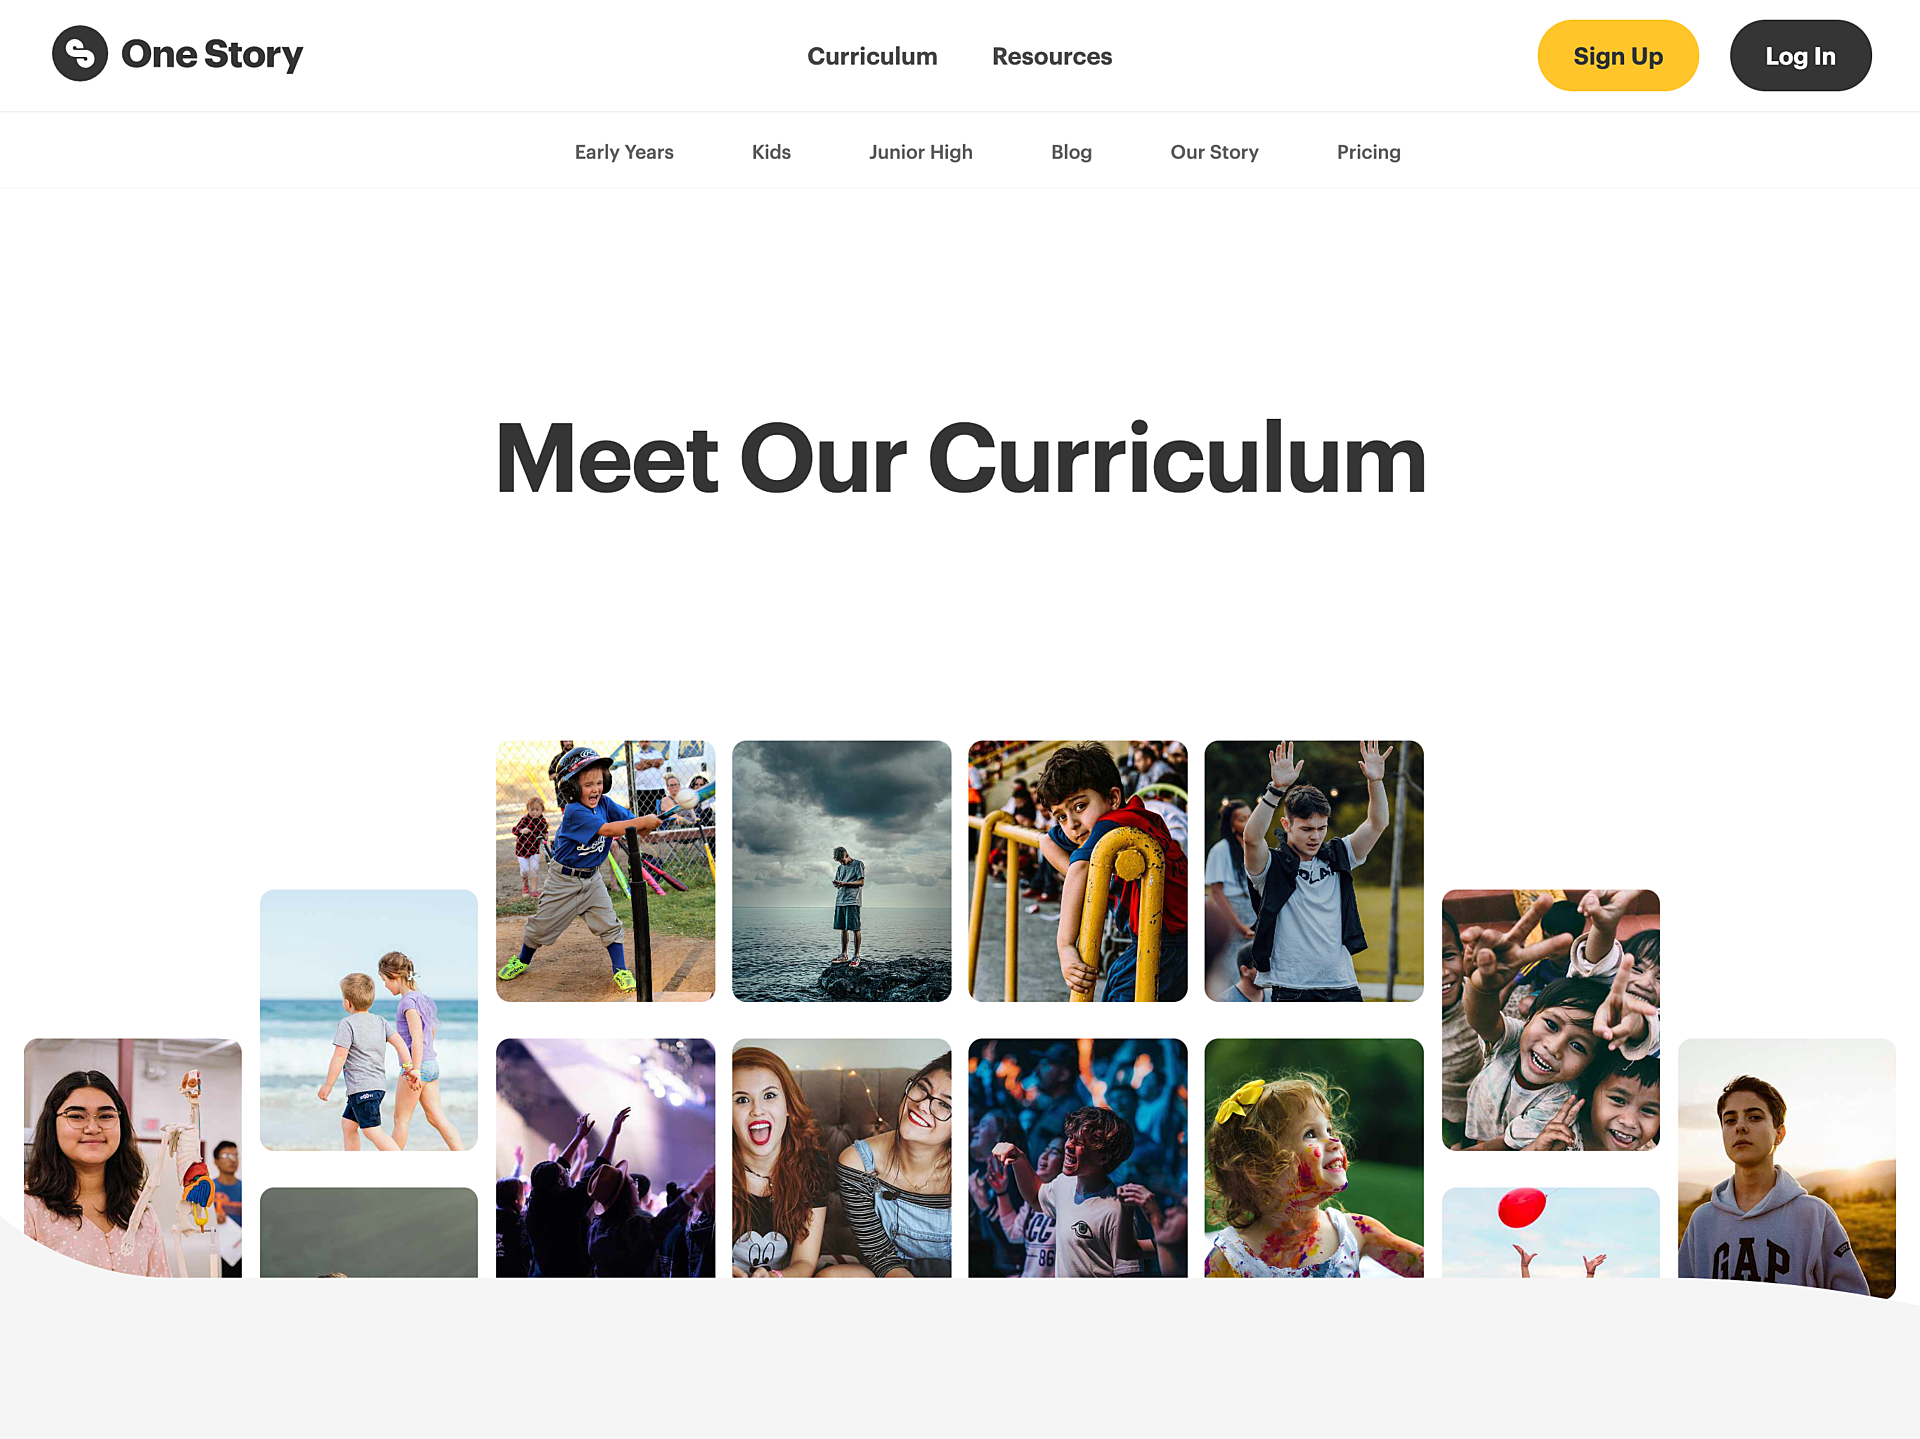 The Meet Our Curriculum page